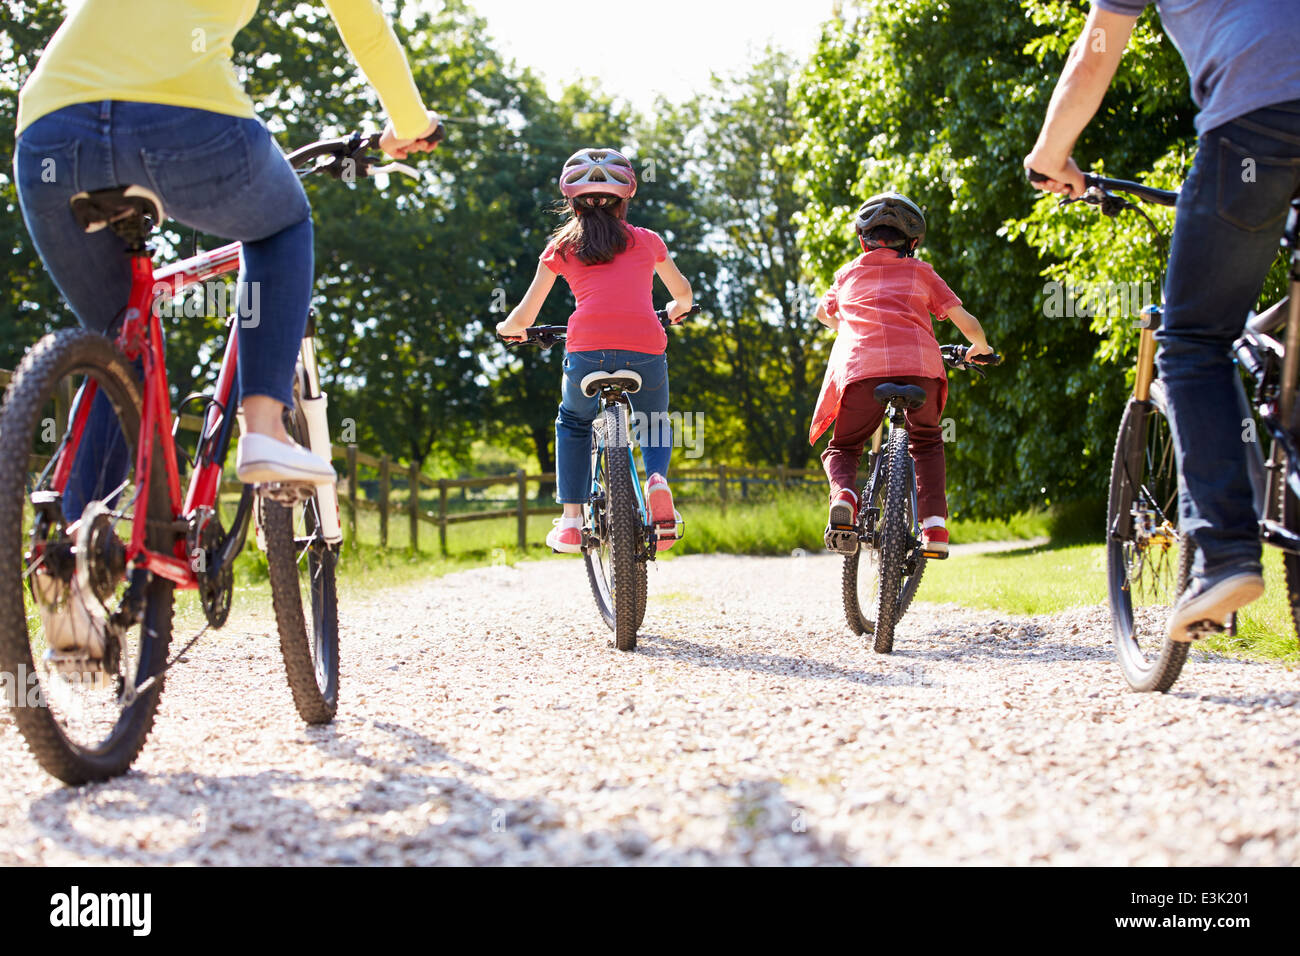 Rear View Of Hispanic Family On Cycle Ride In Countryside Stock Photo